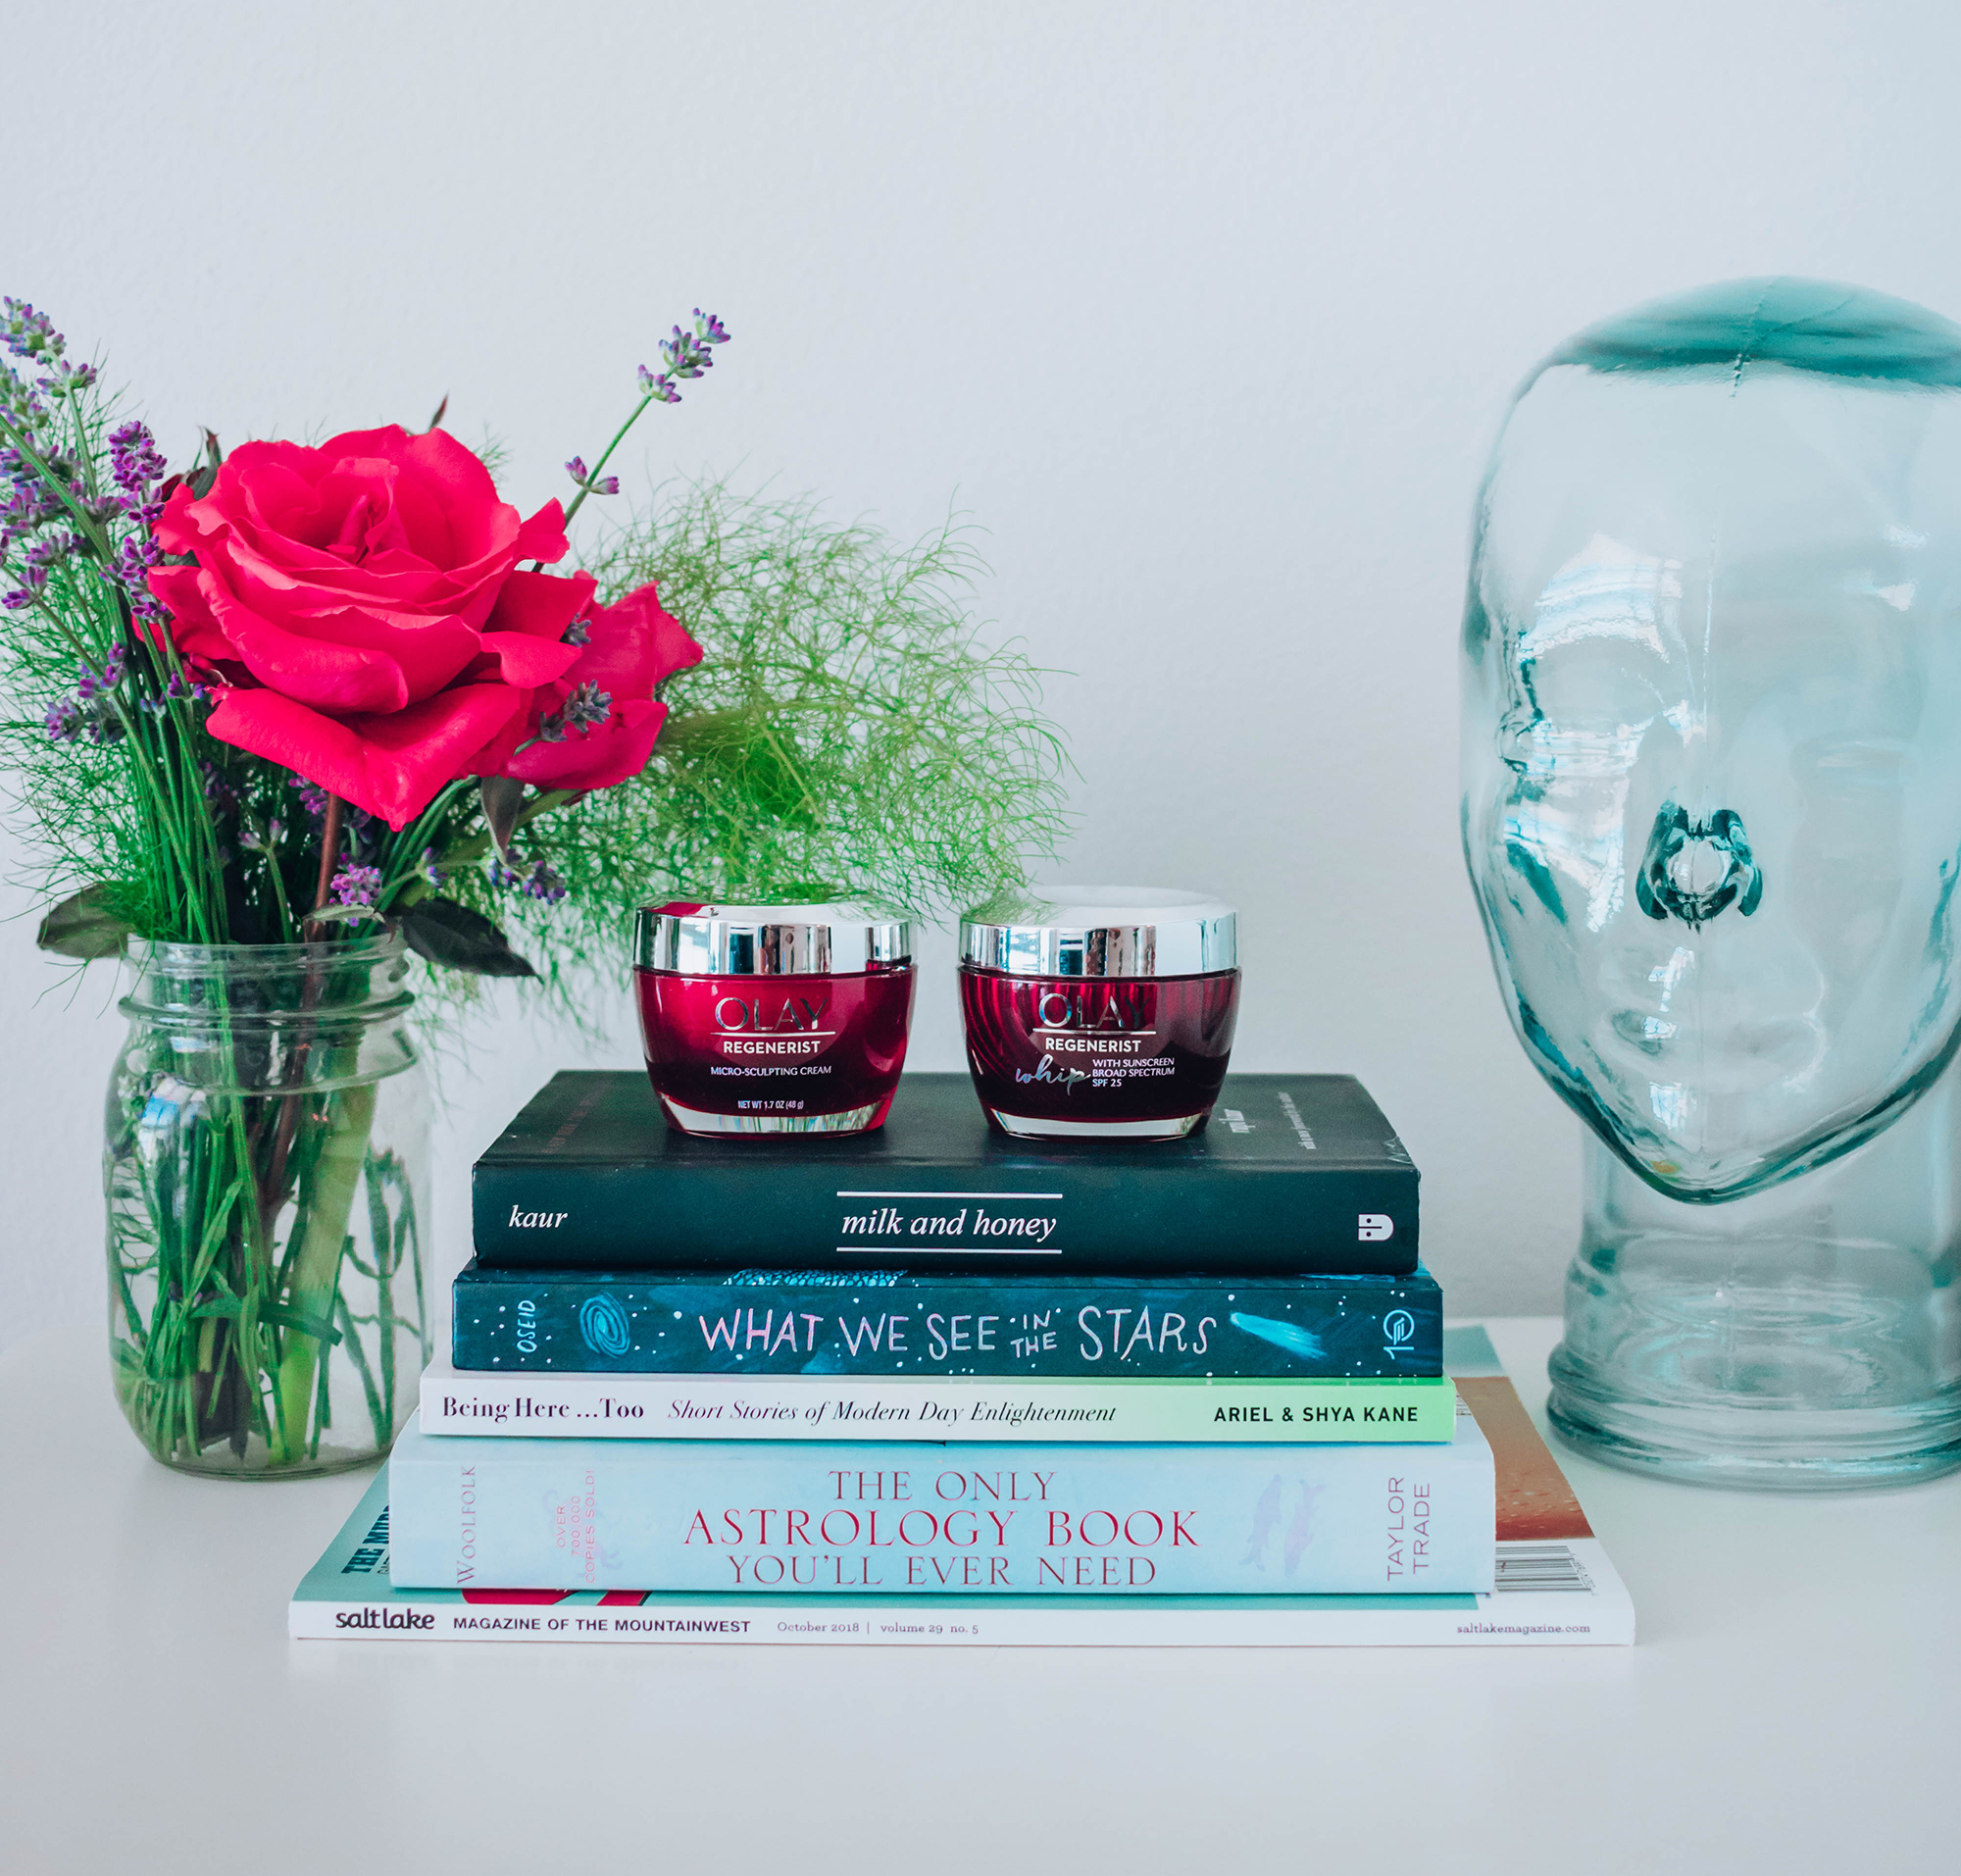 Olay Micro-sculpting Cream and Olay Whip read jars sitting on top of stacked books next to a rose bouquet and glass head art